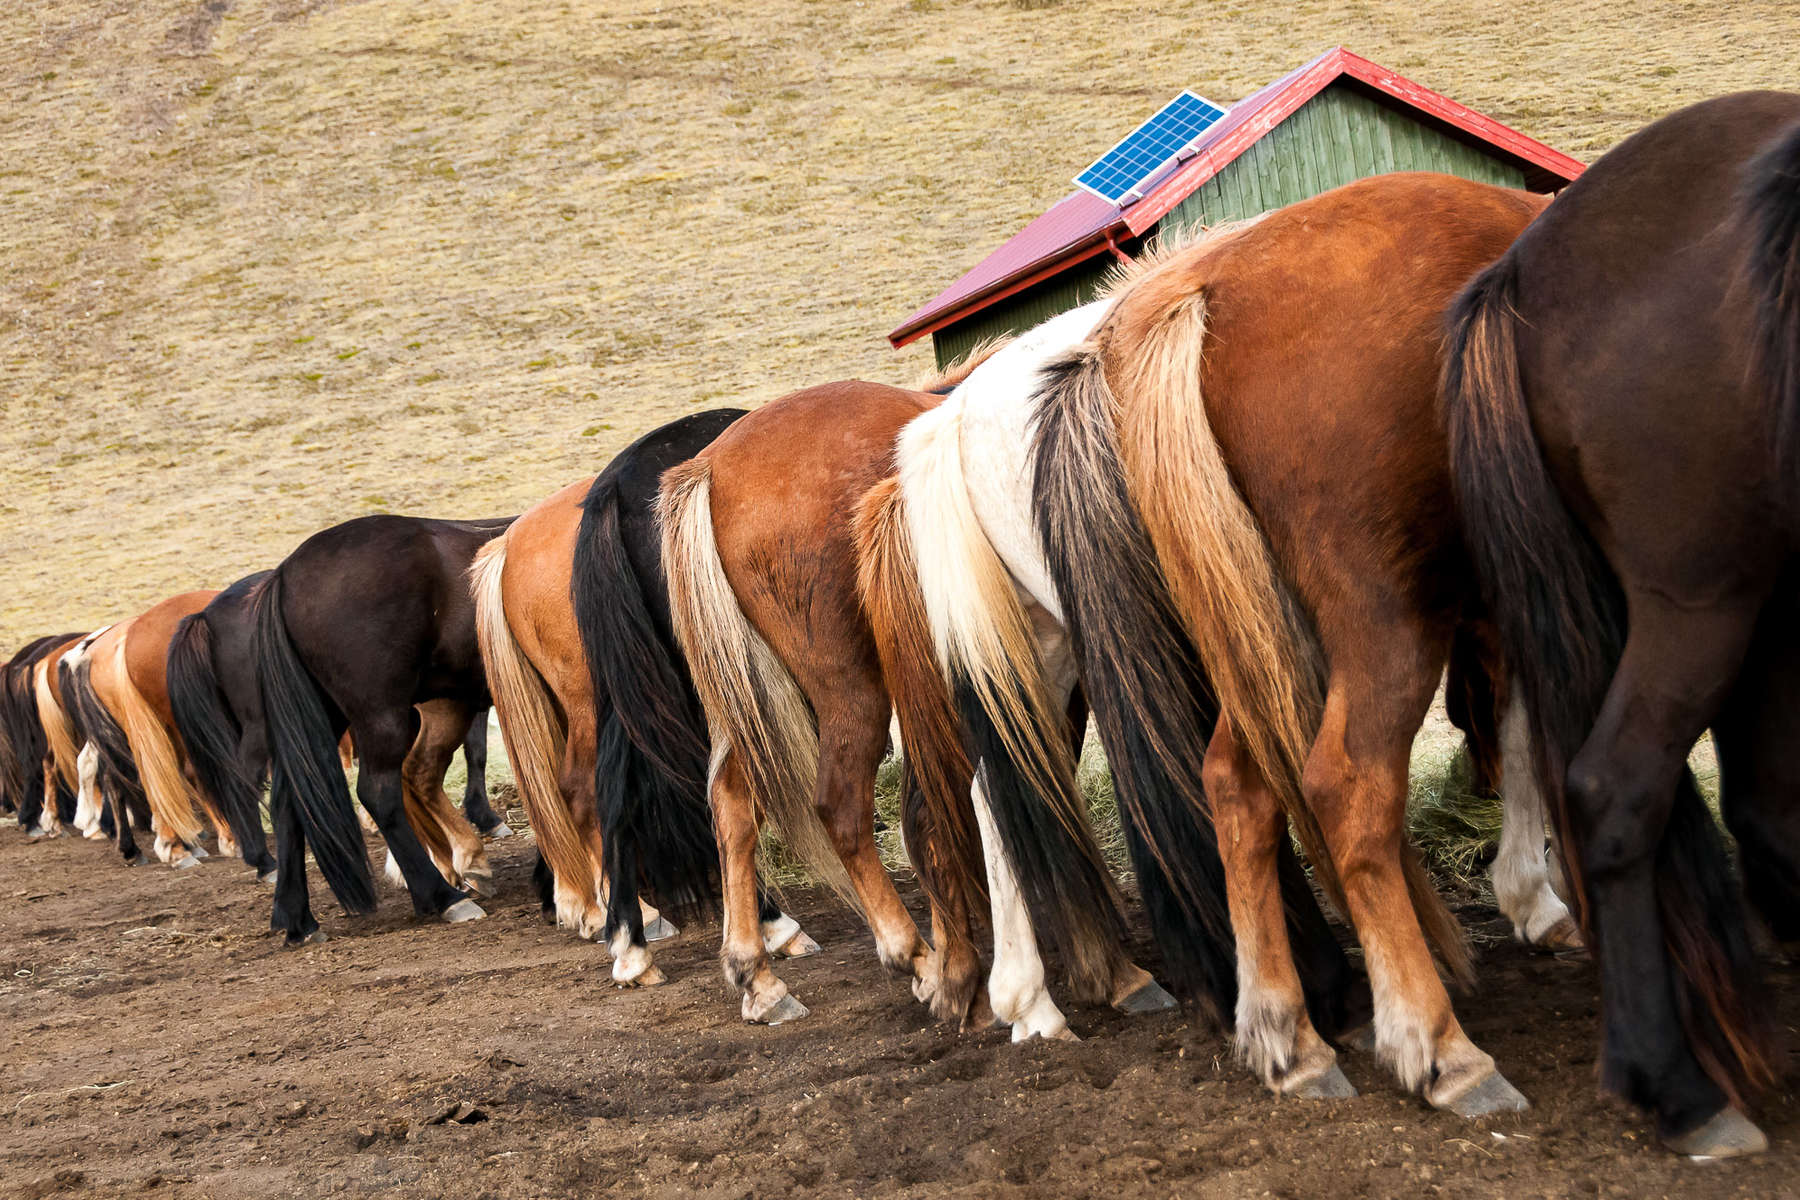 icelandic horses lined up in a row